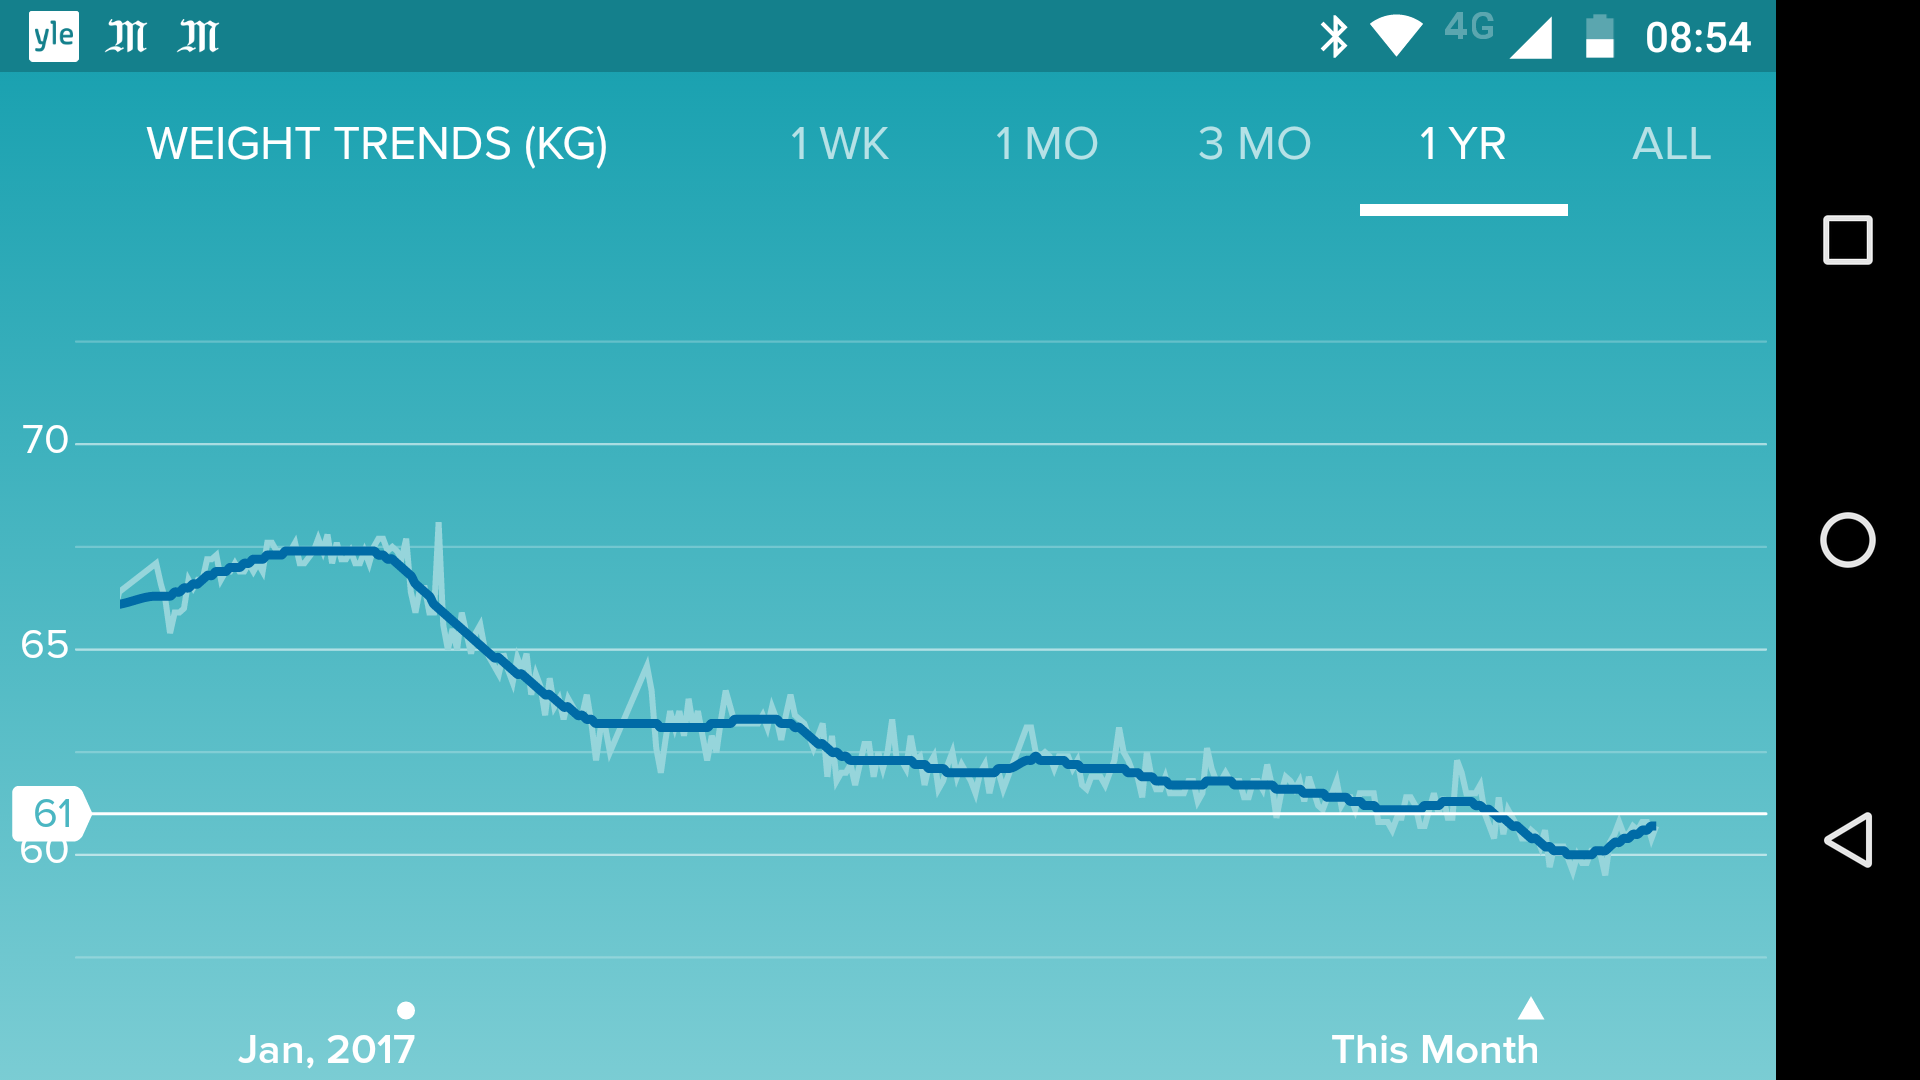 weight tends mean? - Fitbit Community